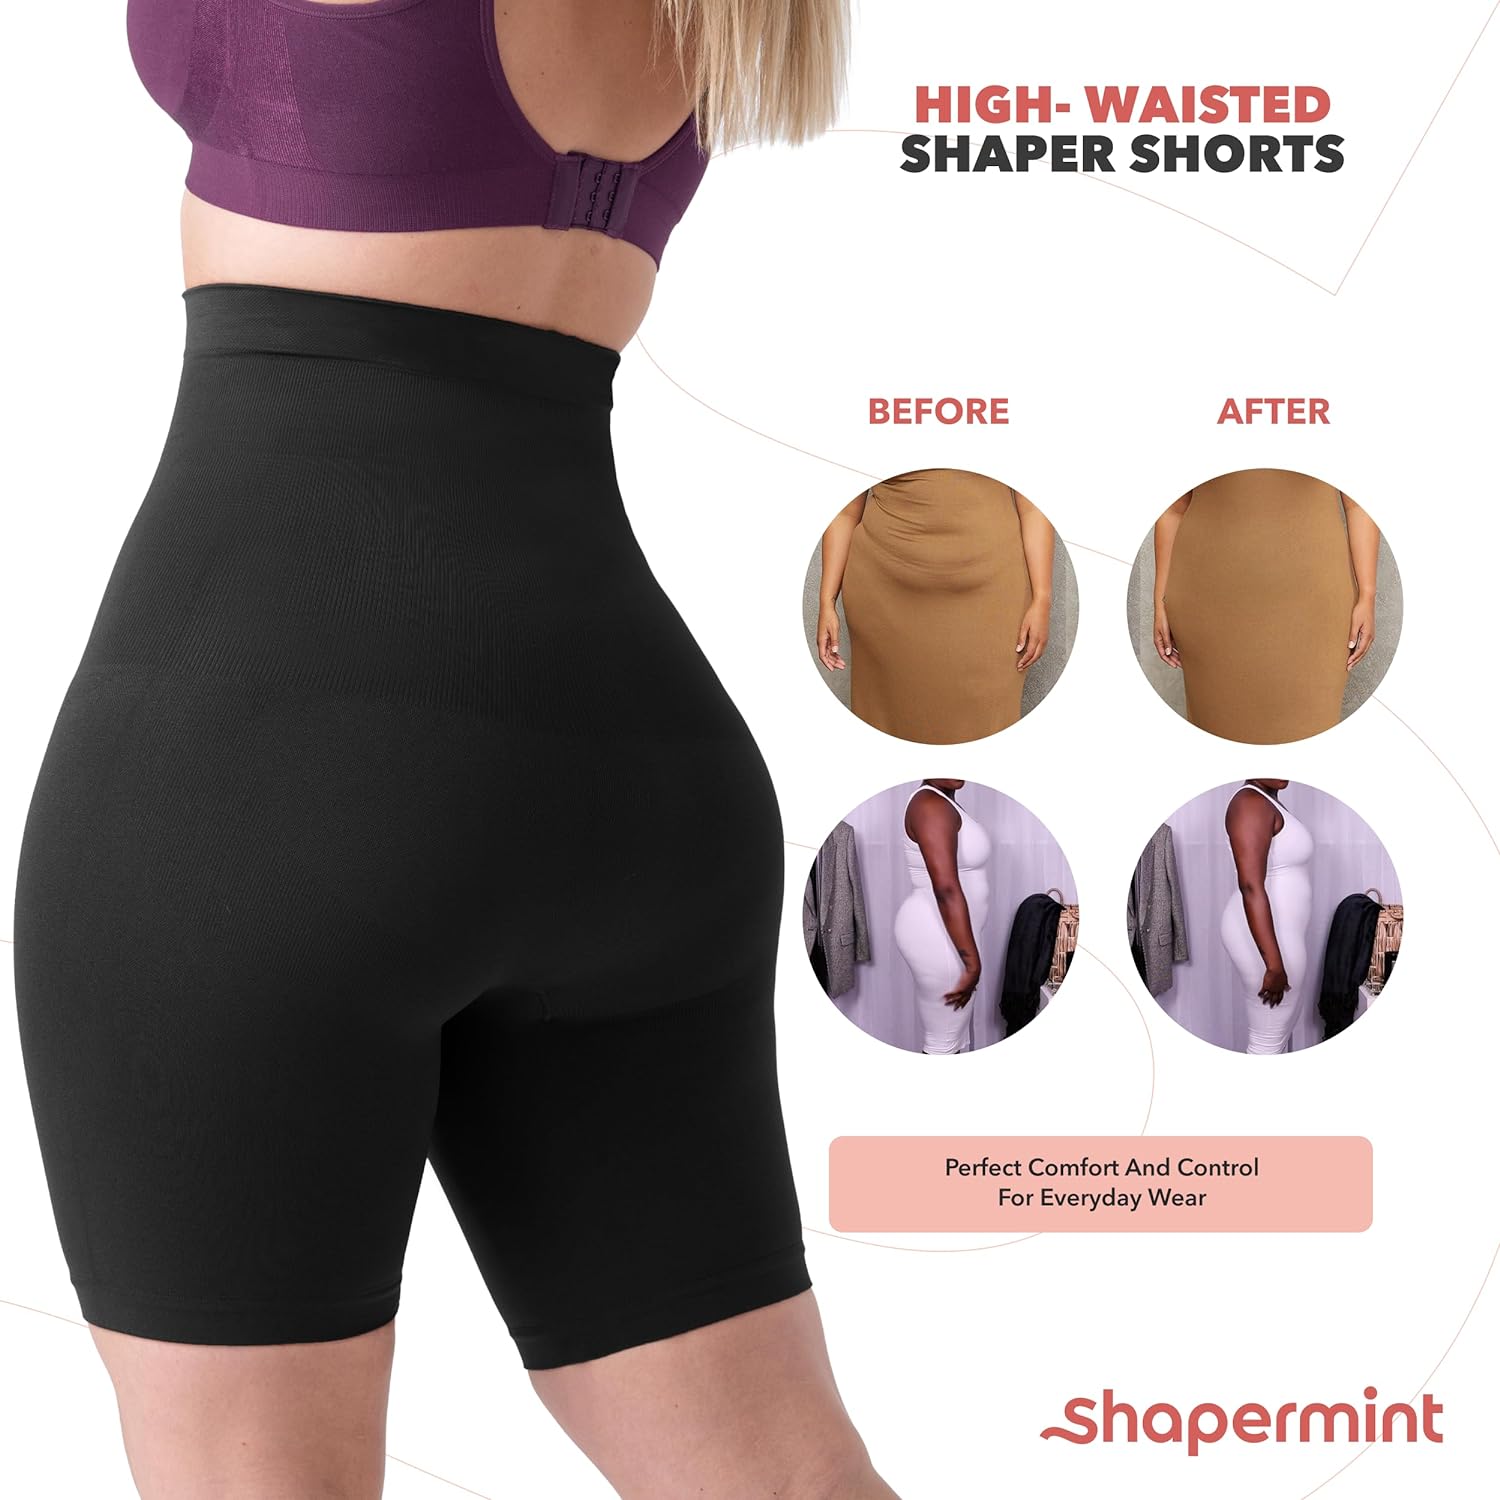 Shapermint Women’s All Day Every Day High Waisted Shaper Shorts - image 5 of 7